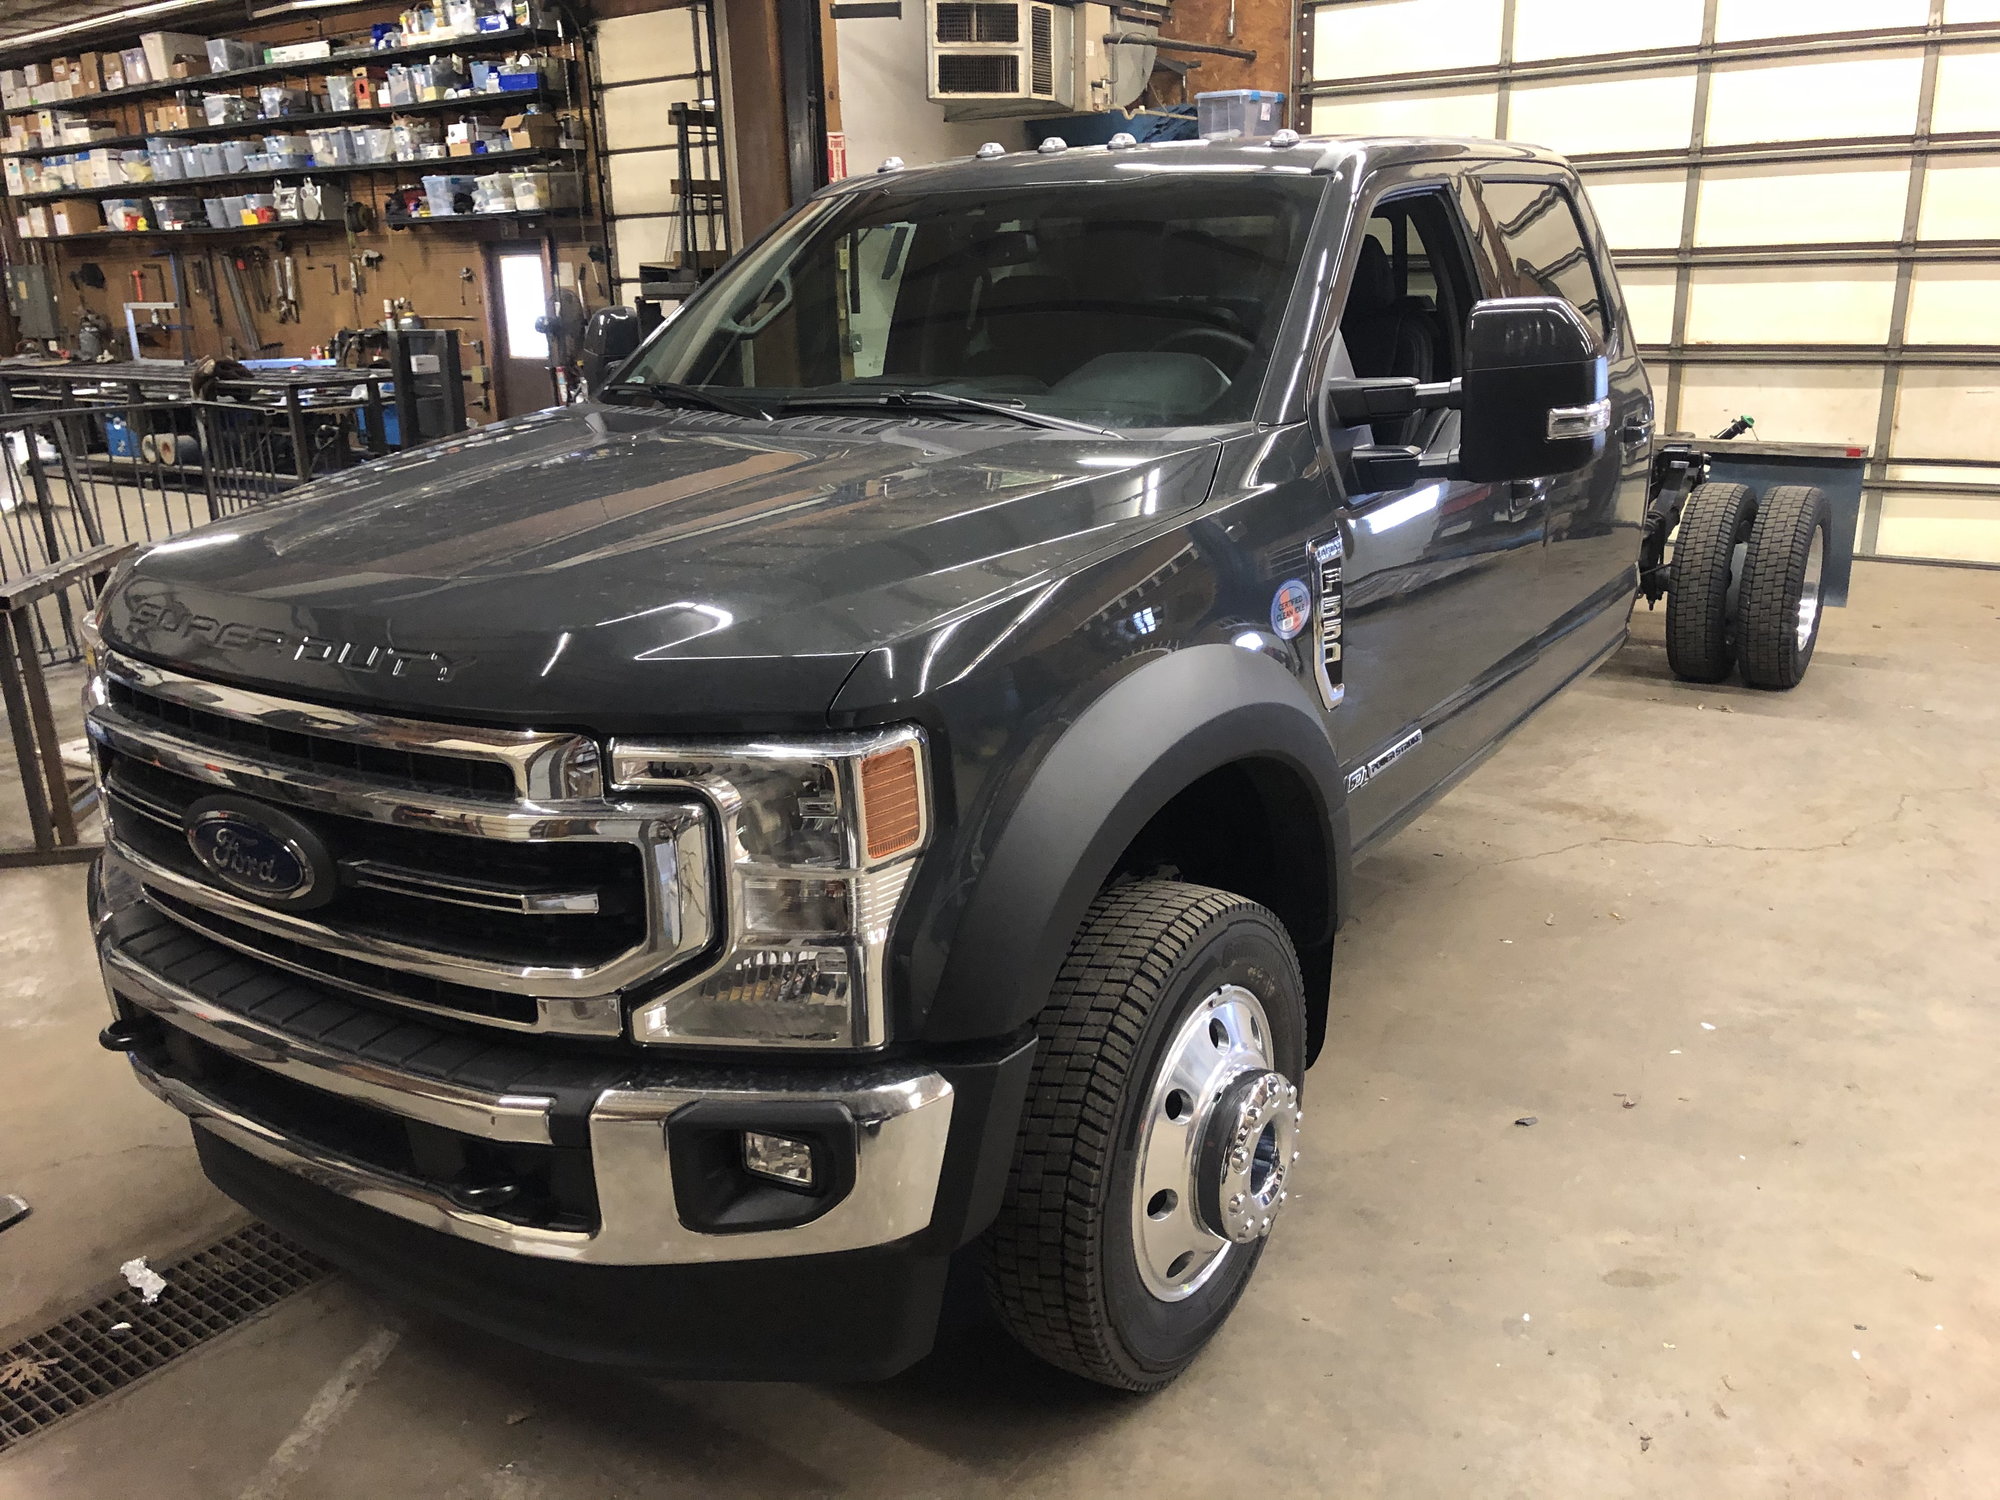 Ford Truck Enthusiasts Forums